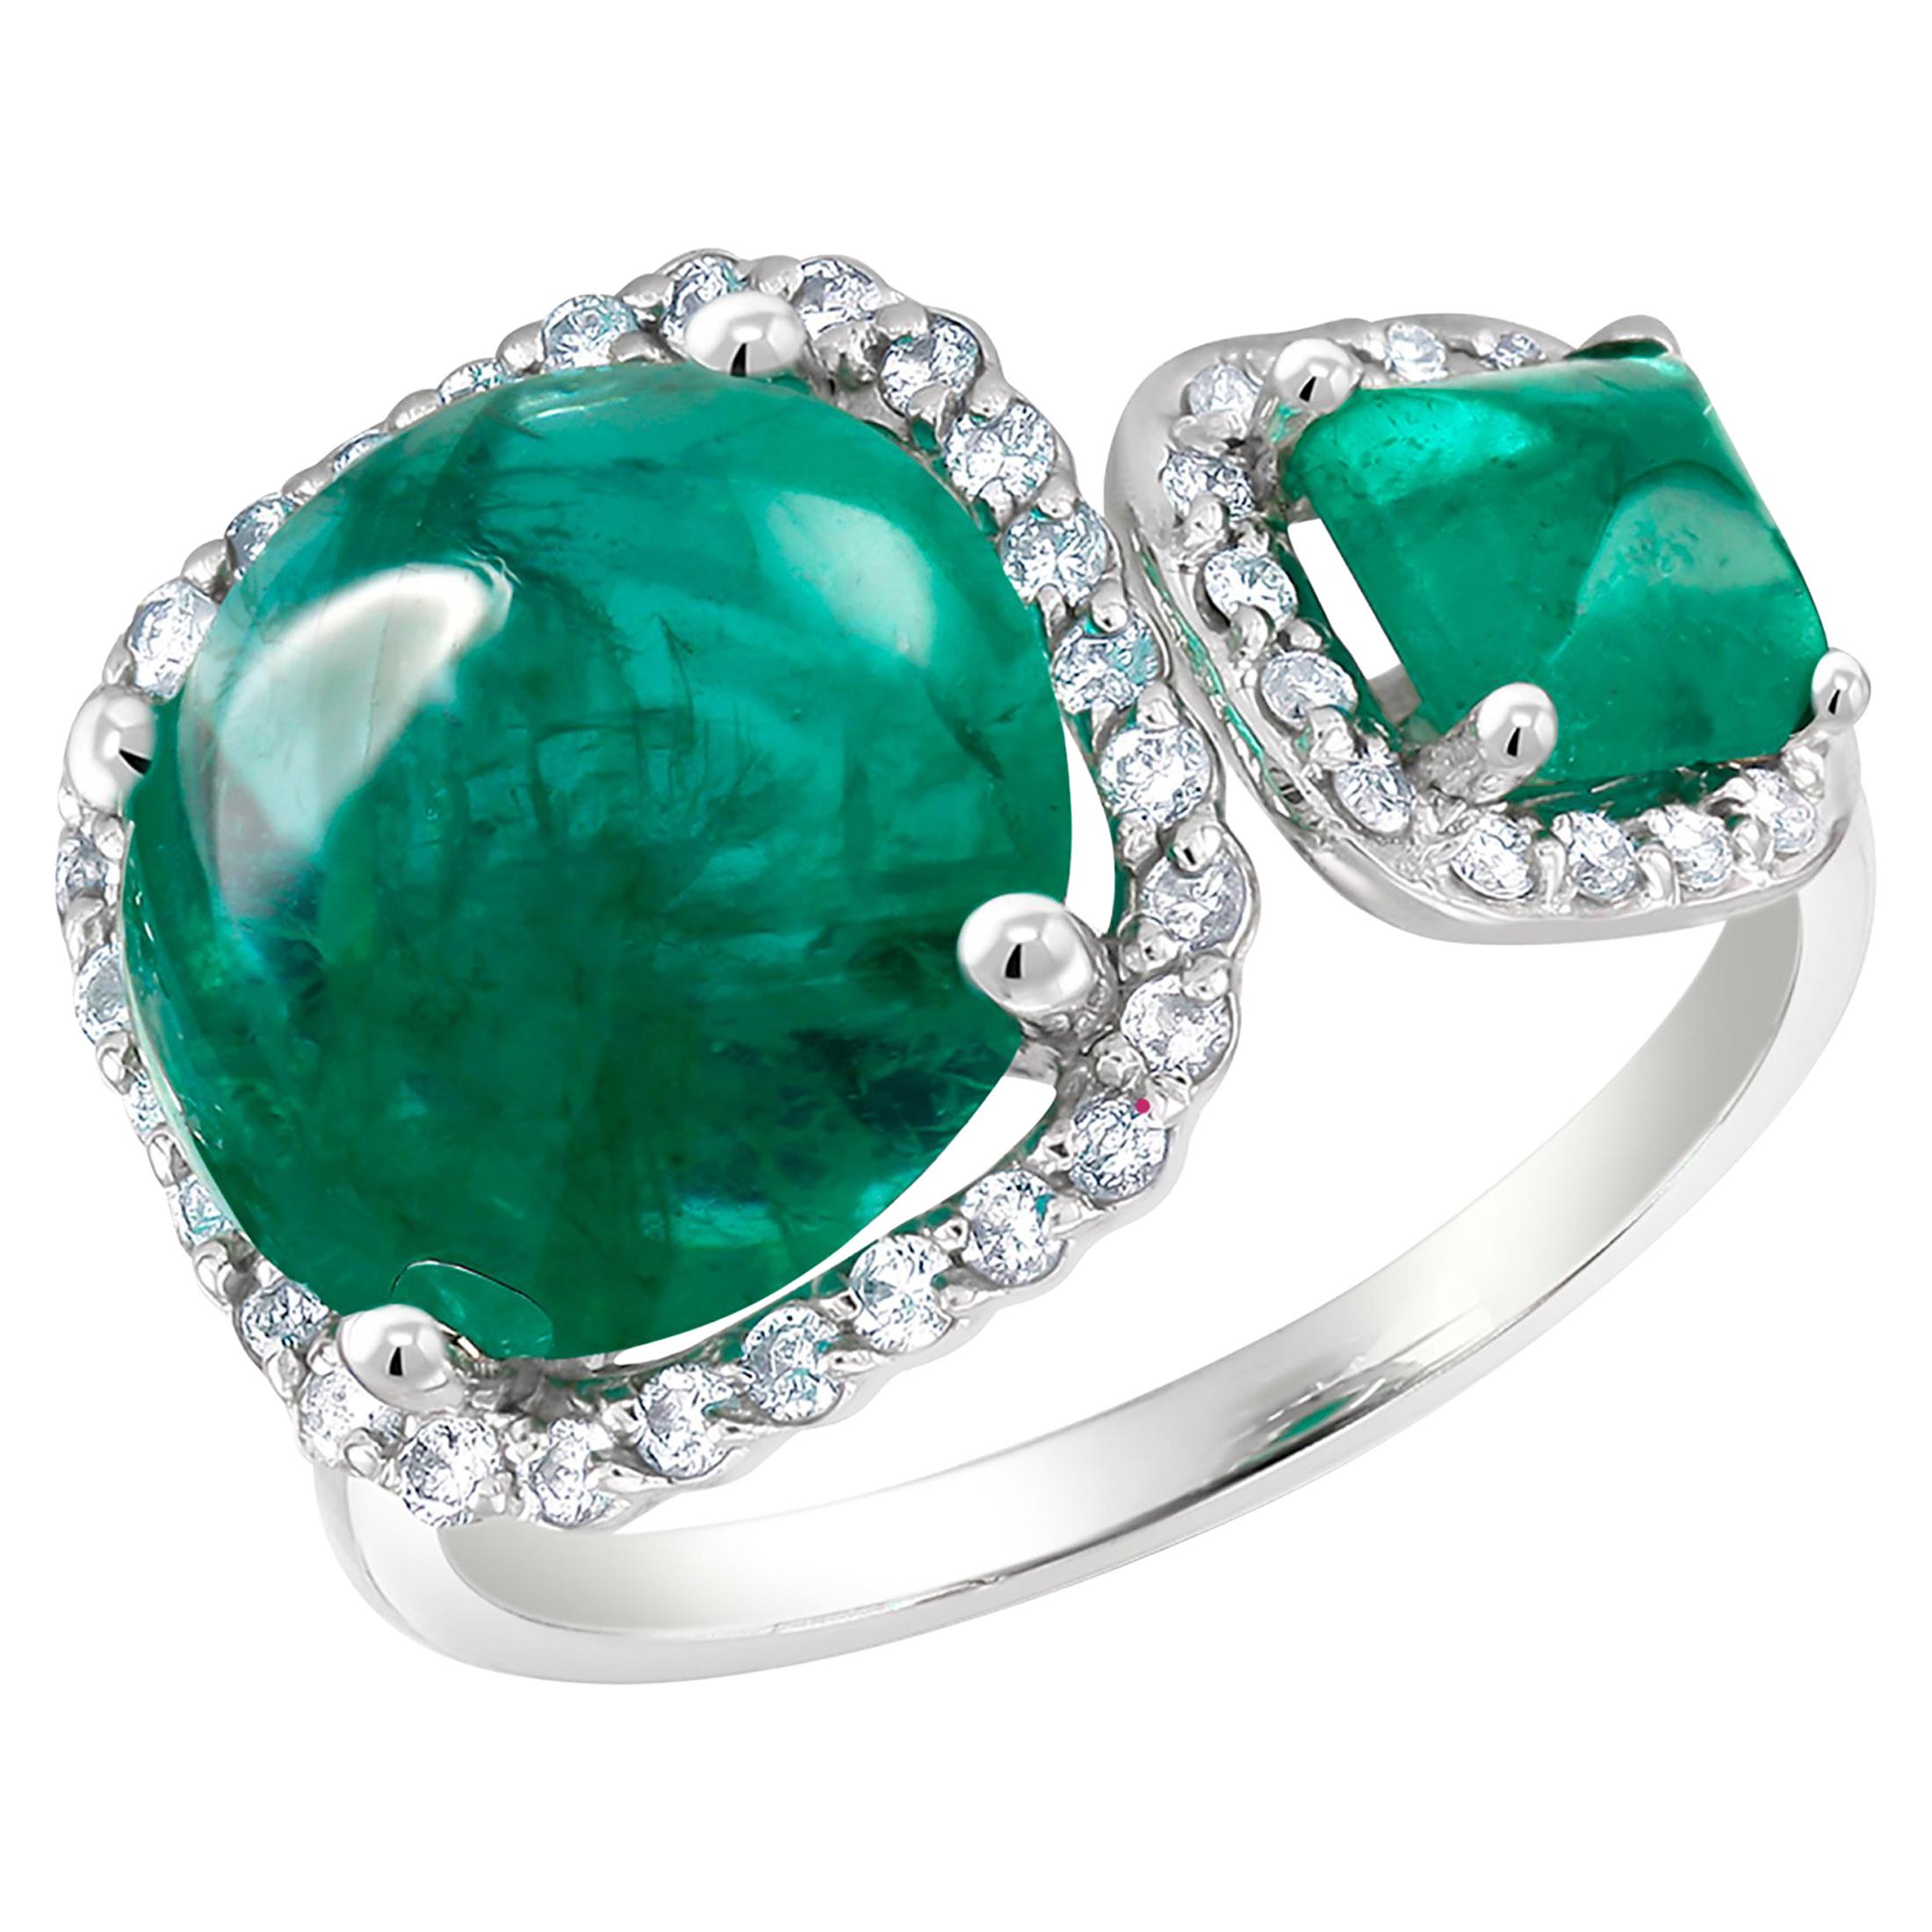 Eighteen karats white gold open shank cocktail ring 
Two Cabochon emeralds in halo setting
Round shape cabochon emerald weighing 6.36 carat  
Sugarloaf cabochon emerald  weighing 0.85 carat
Diamond weighing 0.70 carat                                